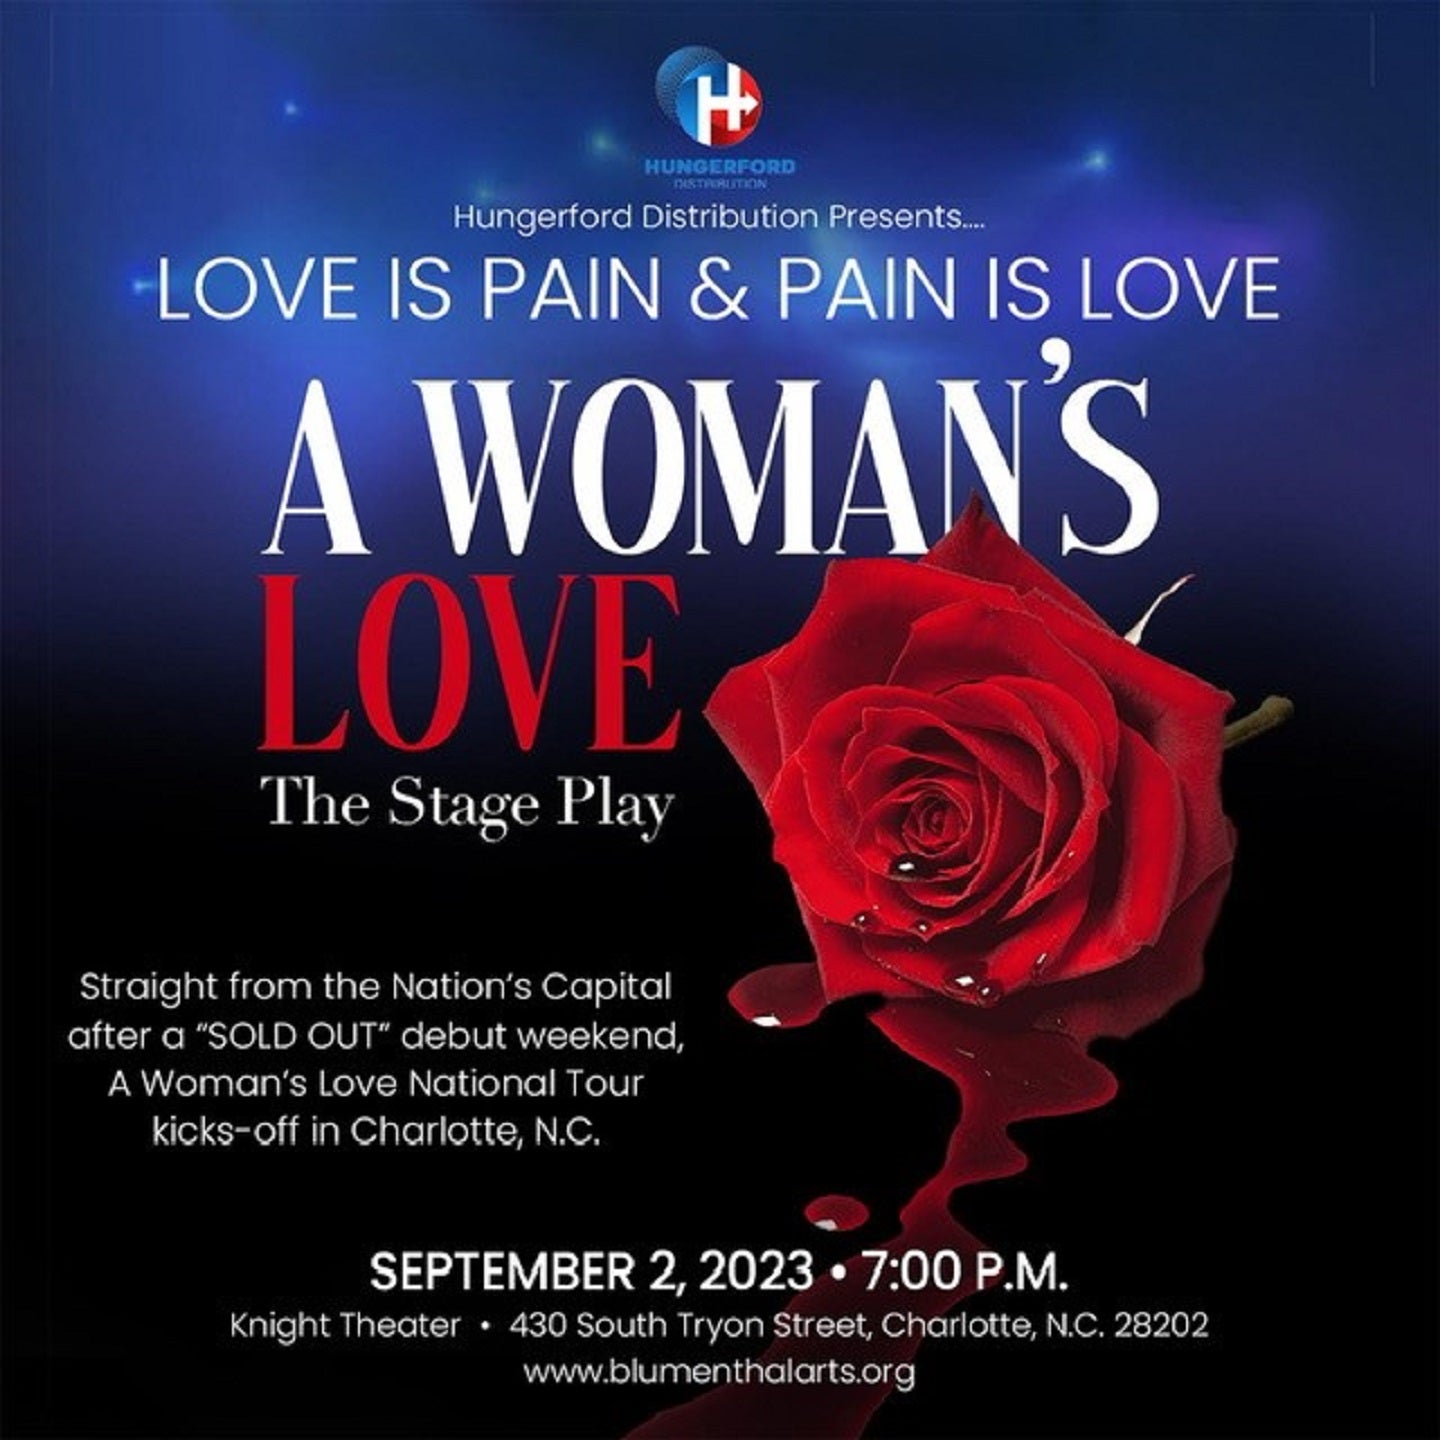 A Woman's Love: The Stage Play